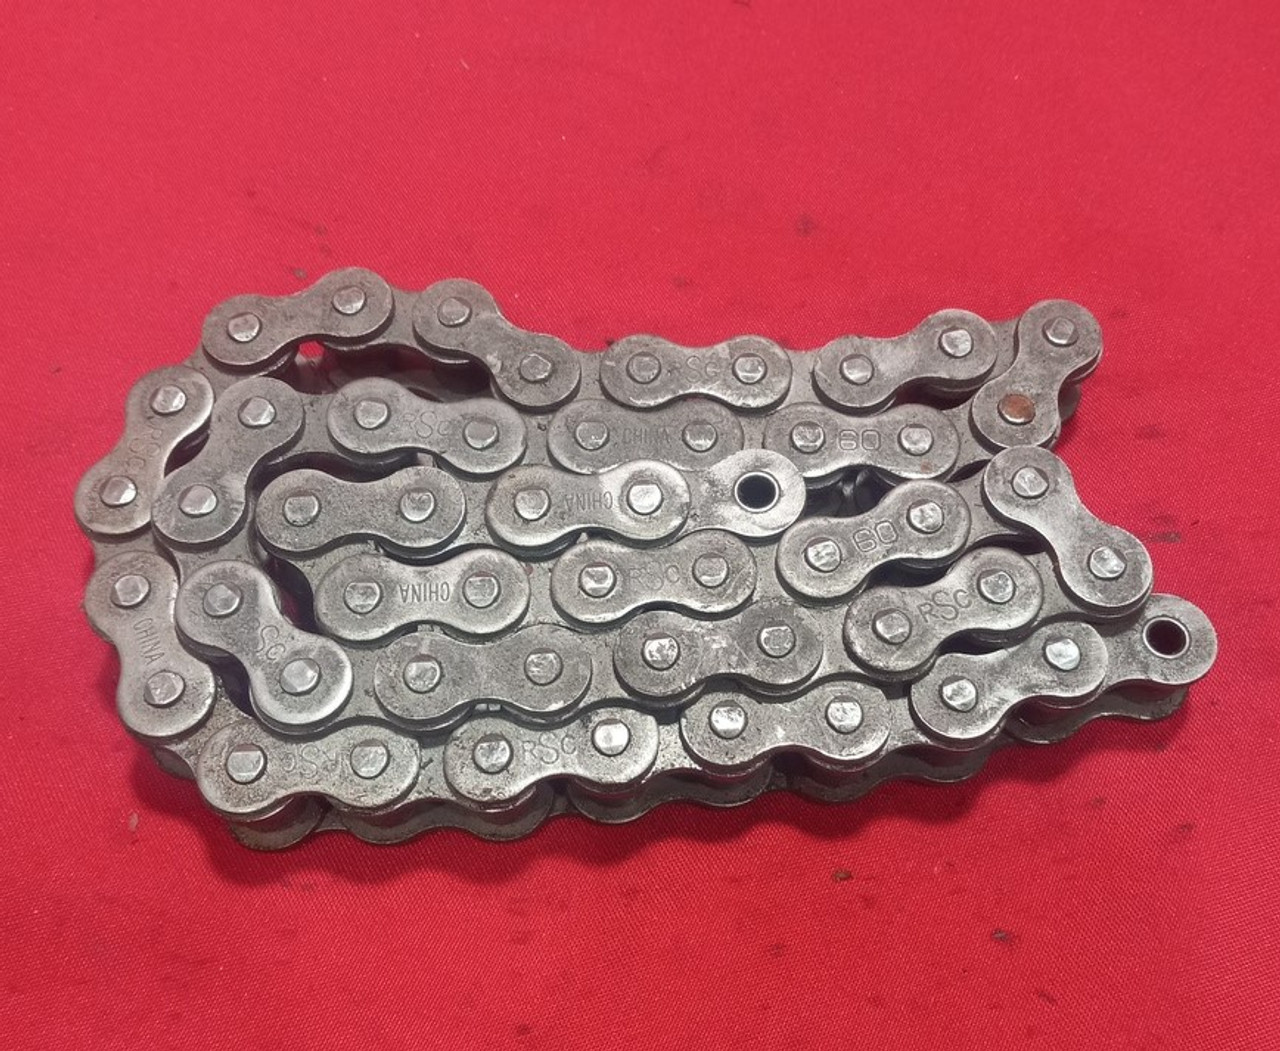 Sapphire RSC ANSI 60 Roller Chain 3 Ft. 2-3/4" Long 3/4" Pitch 